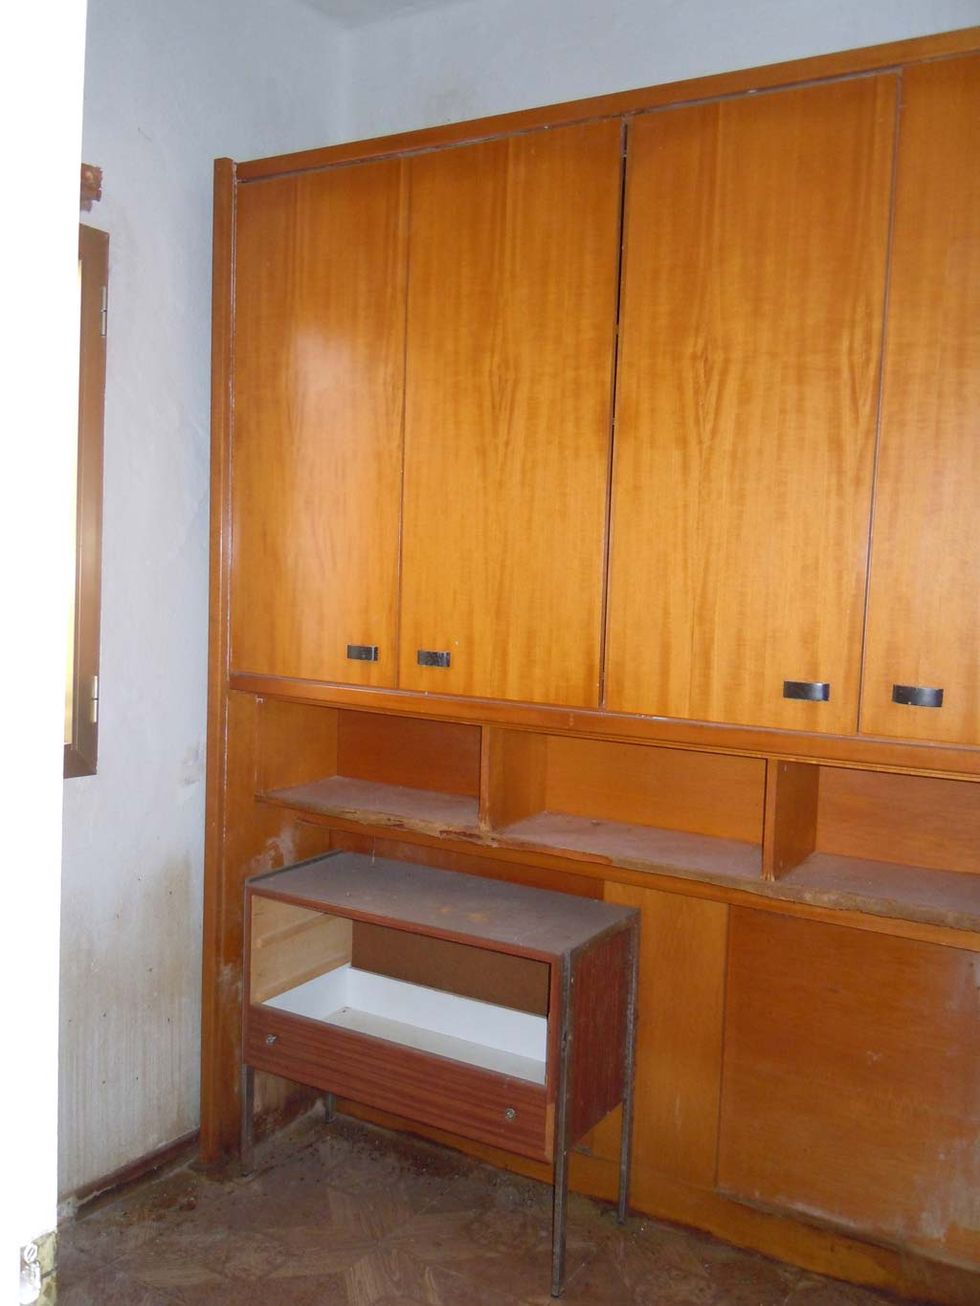 Wood, Hardwood, Wood stain, Pattern, Tan, Varnish, Plywood, Cupboard, Cabinetry, Rectangle, 